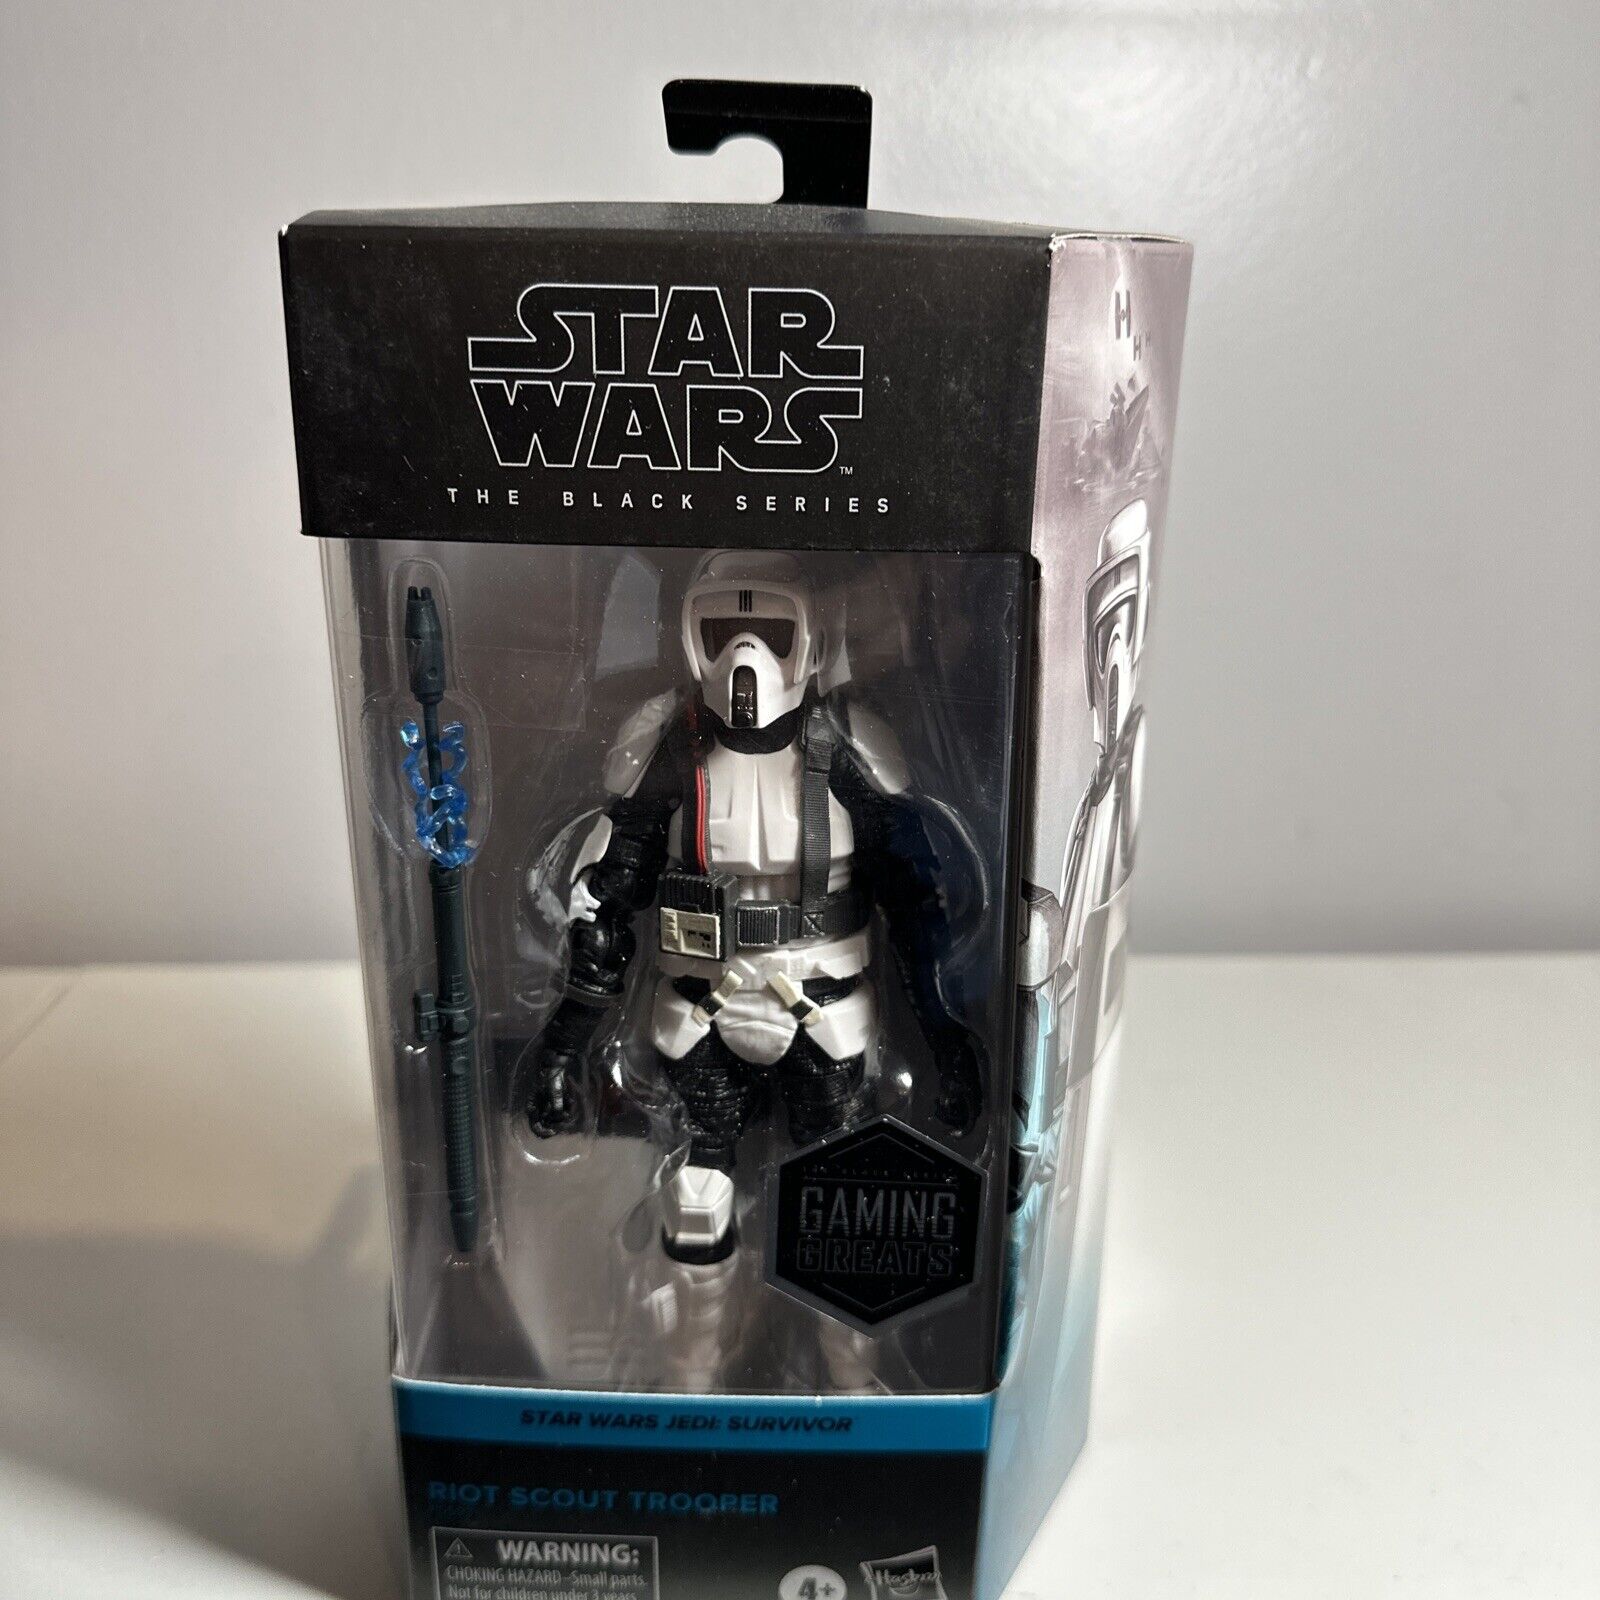 Star Wars The Black Series Gaming Greats 6" Figure Riot Scout Trooper(NEW)Sealed